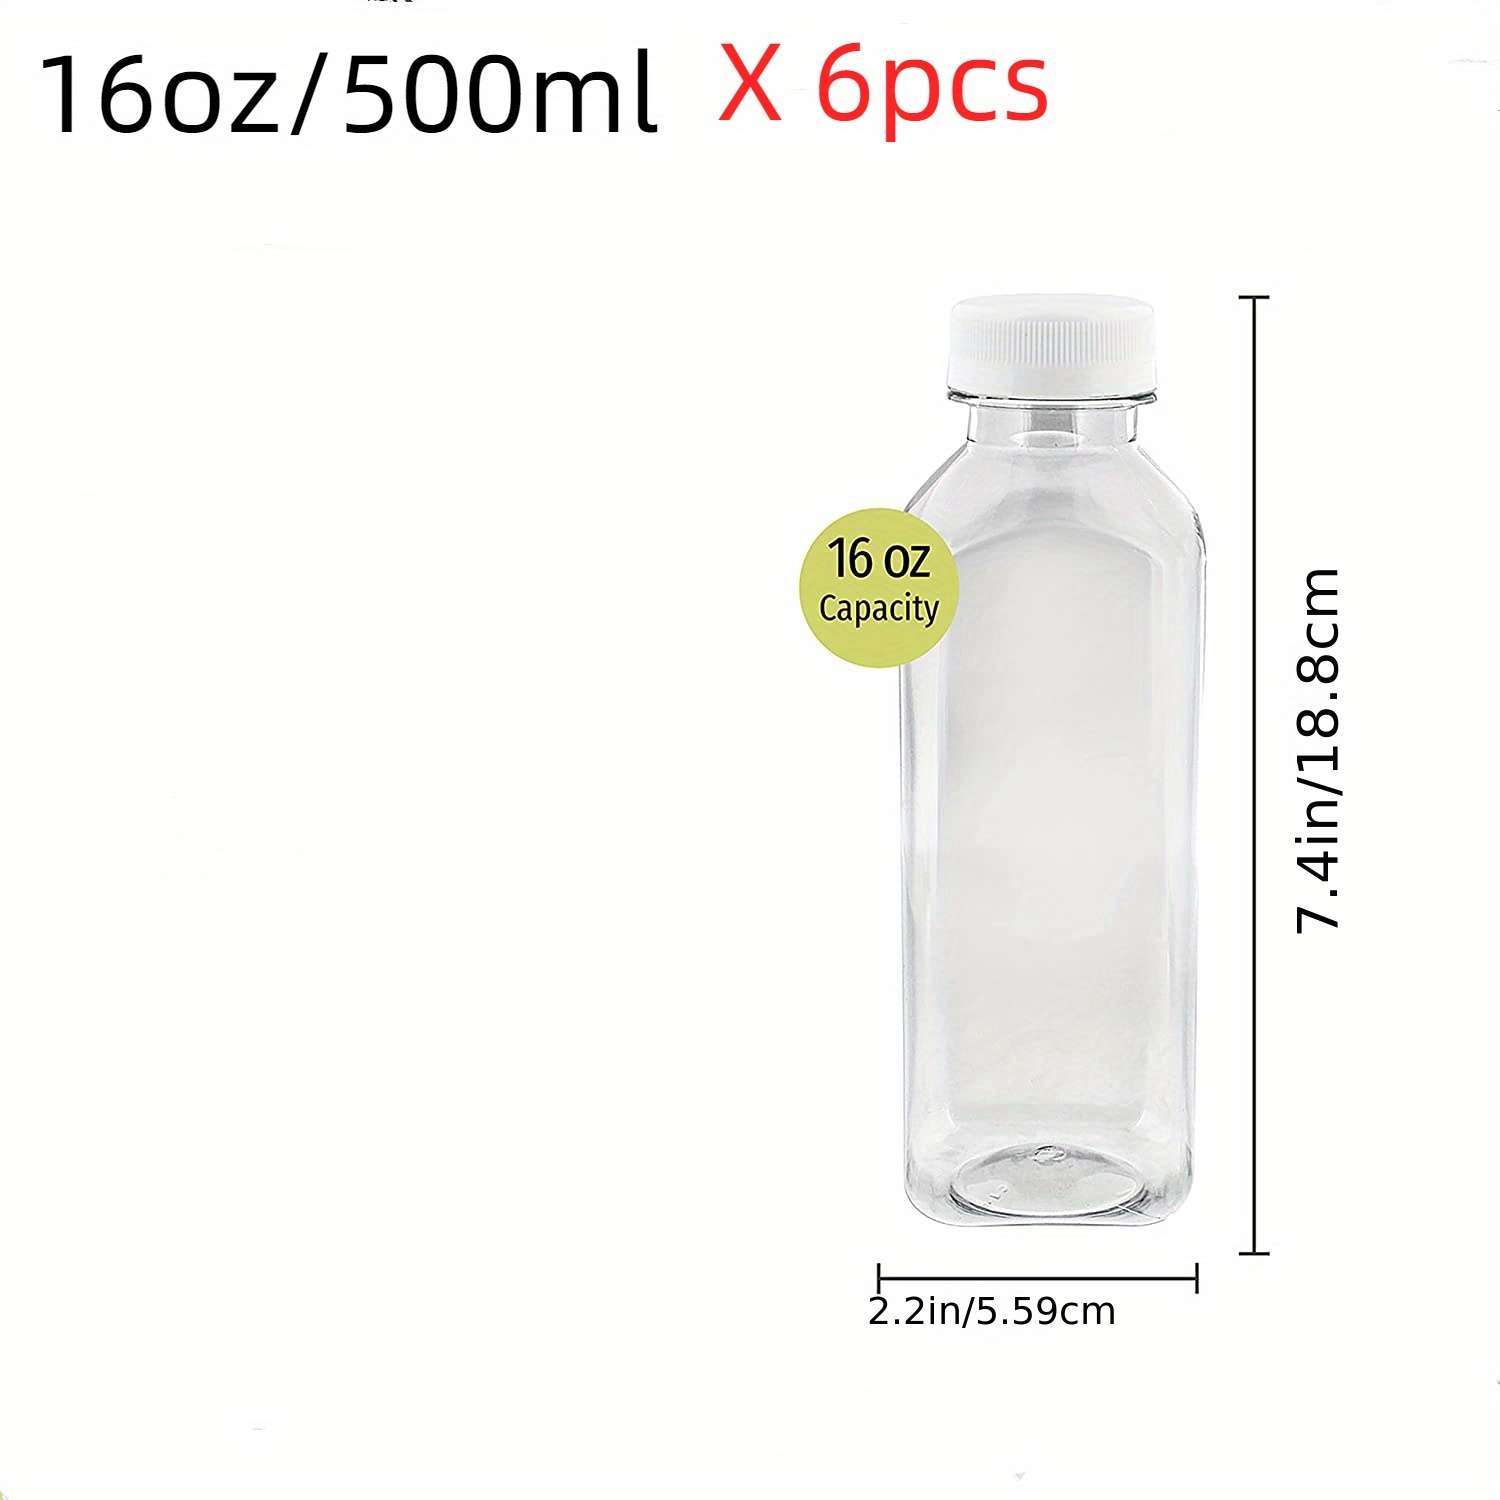 [10 Pack] 8 oz Clear Square Plastic Juice Bottles with Tamper Evident Caps - Cold Pressed - Smoothie Bottles - Ideal for Juices, Milk, Smoothies